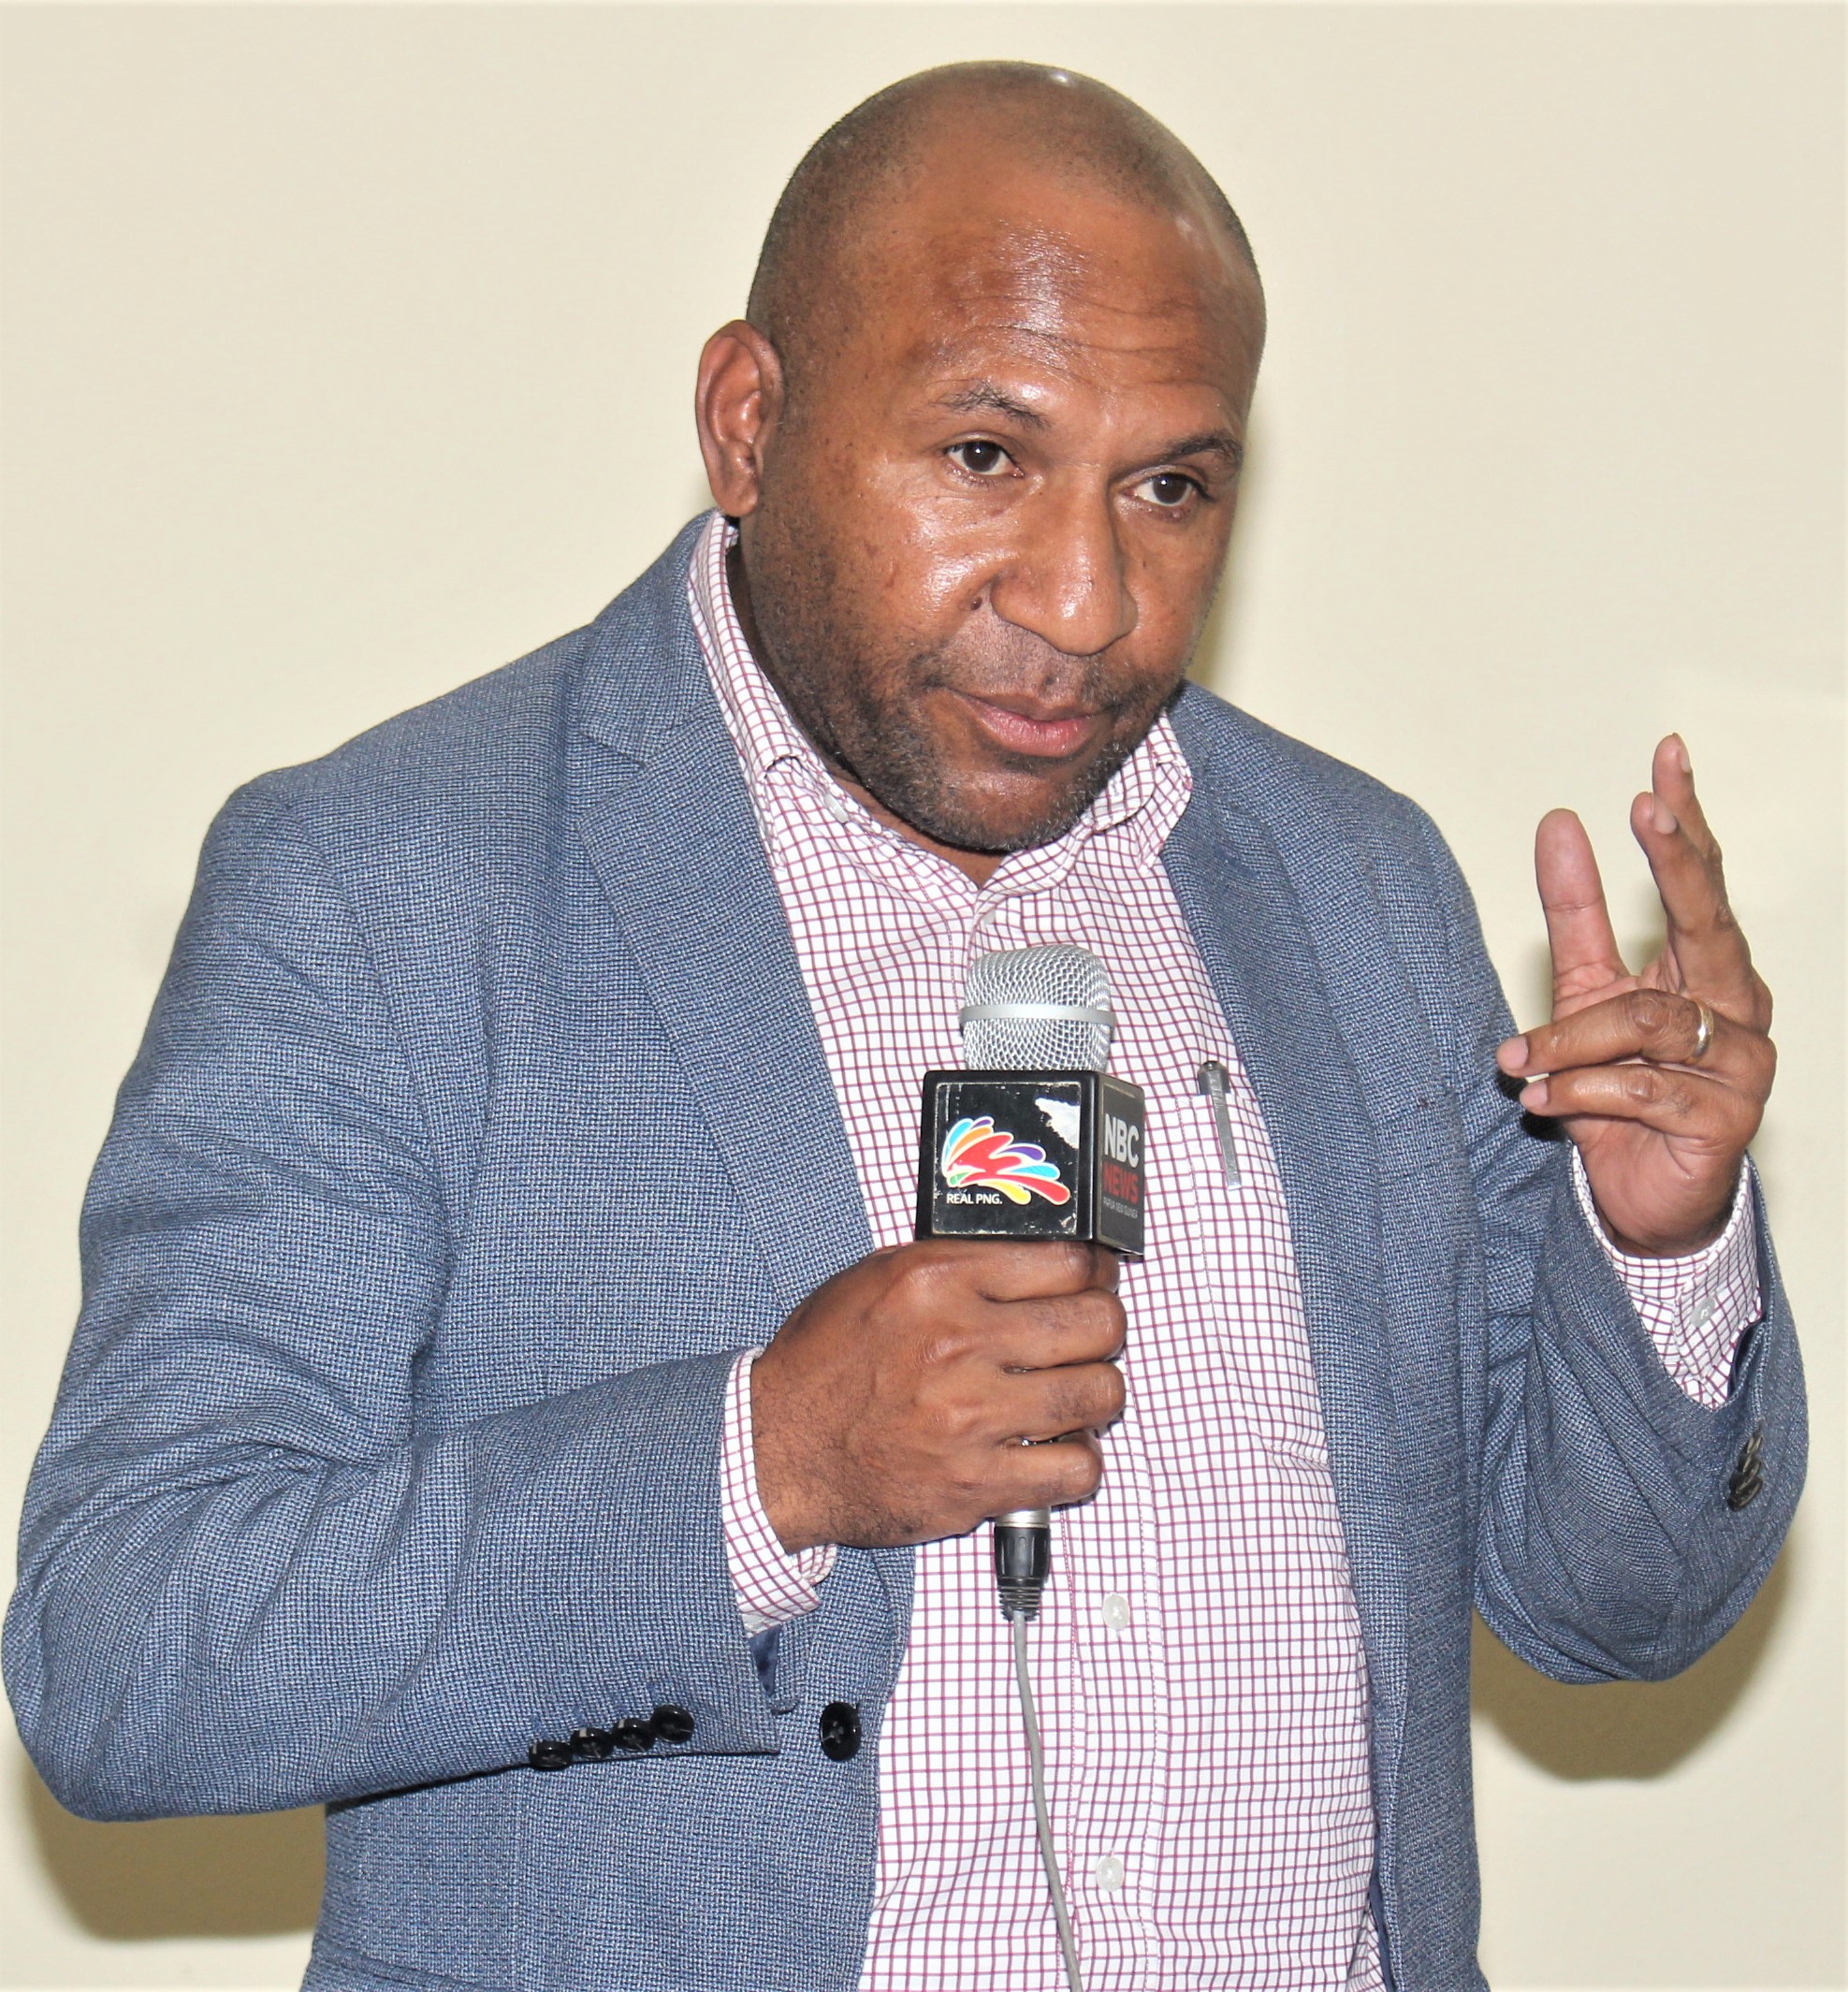 Legal officer of the National Department of health Steven Jolawara witnessed the swearing-in of Fego Otta Kiniafa signing legal instruments as the new Chairman for the Eastern Highlands Provincial Health Authority